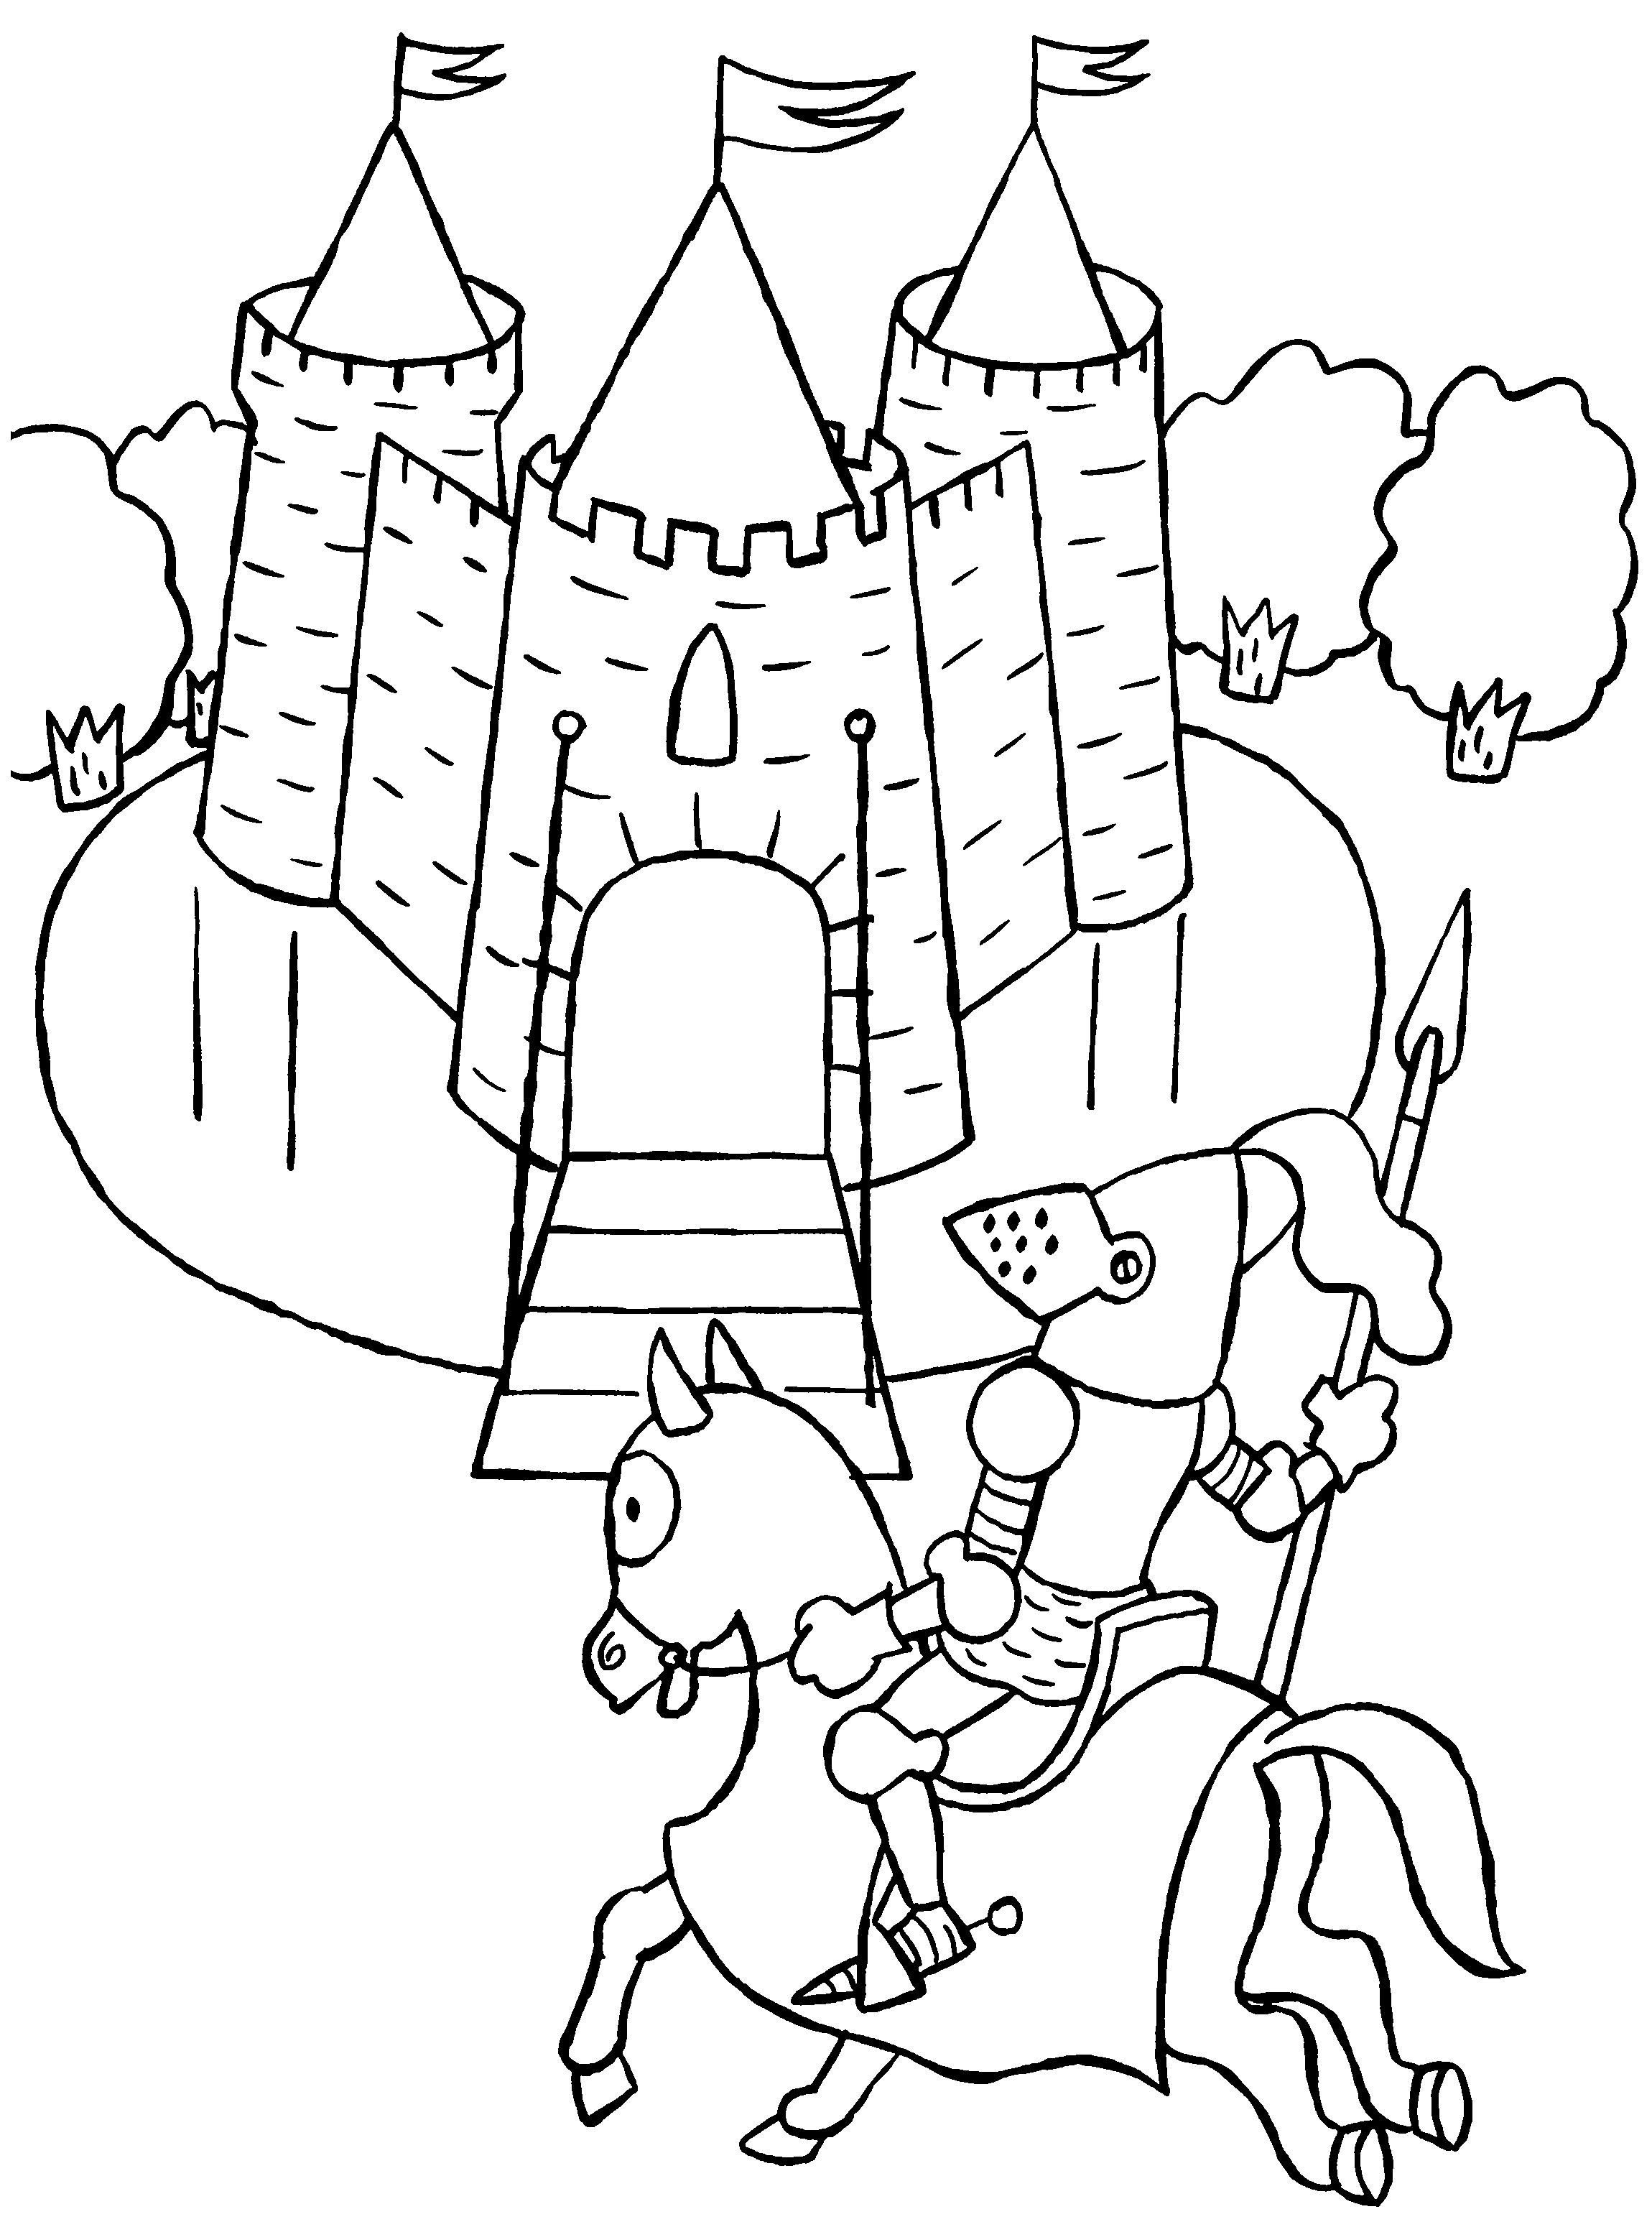 Knights Coloring Pages - Coloringpages1001.com